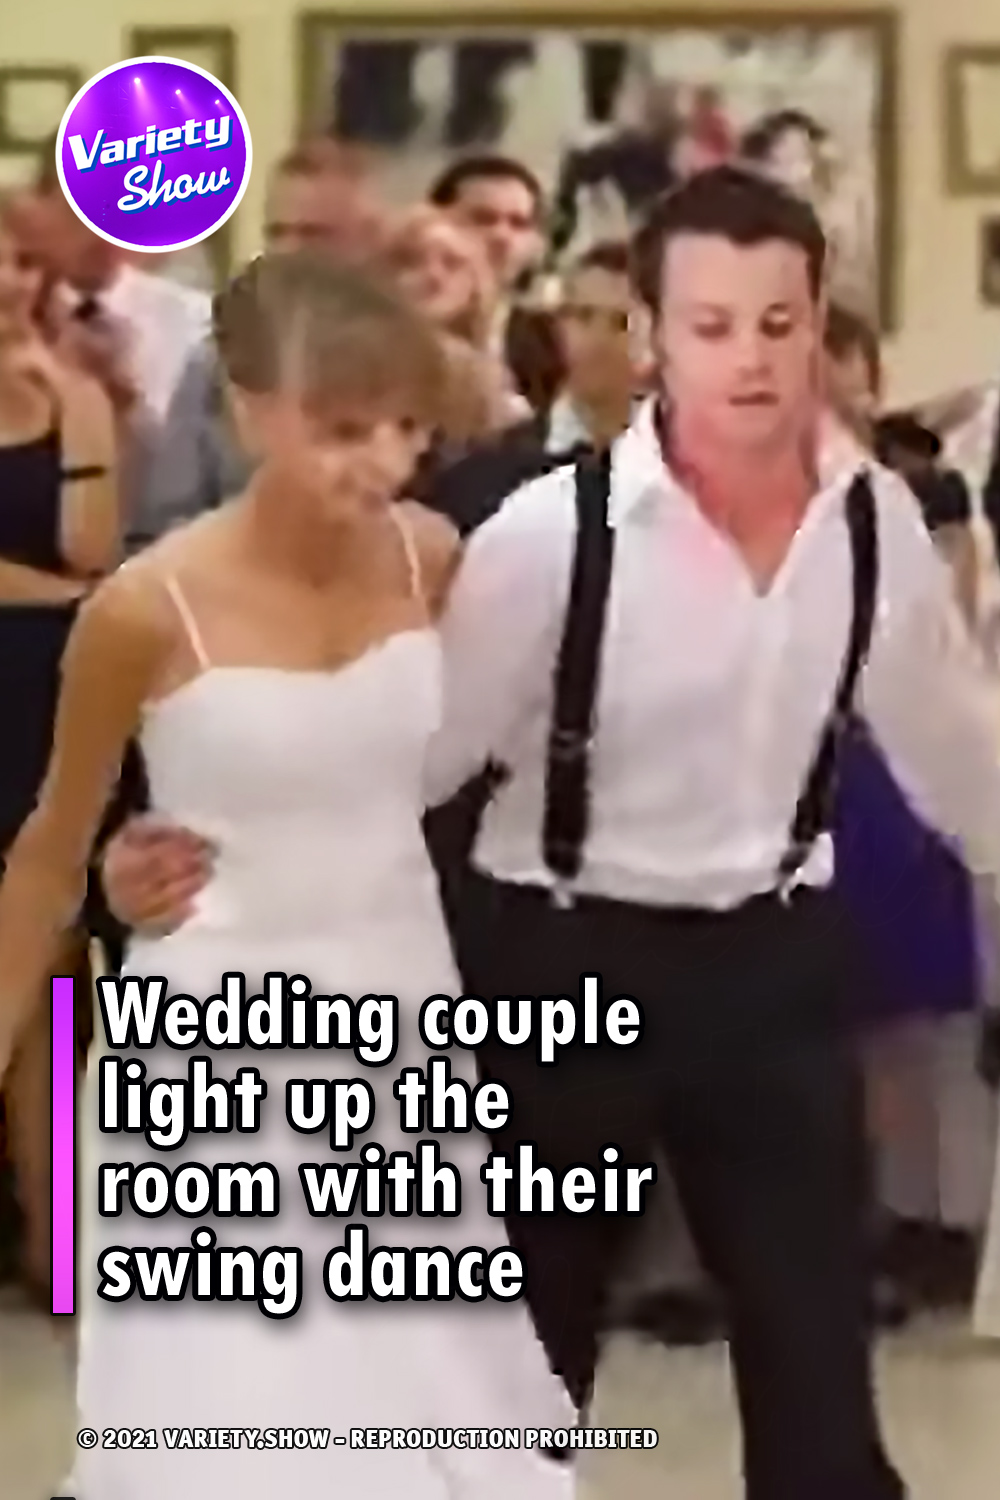 Wedding couple light up the room with their swing dance